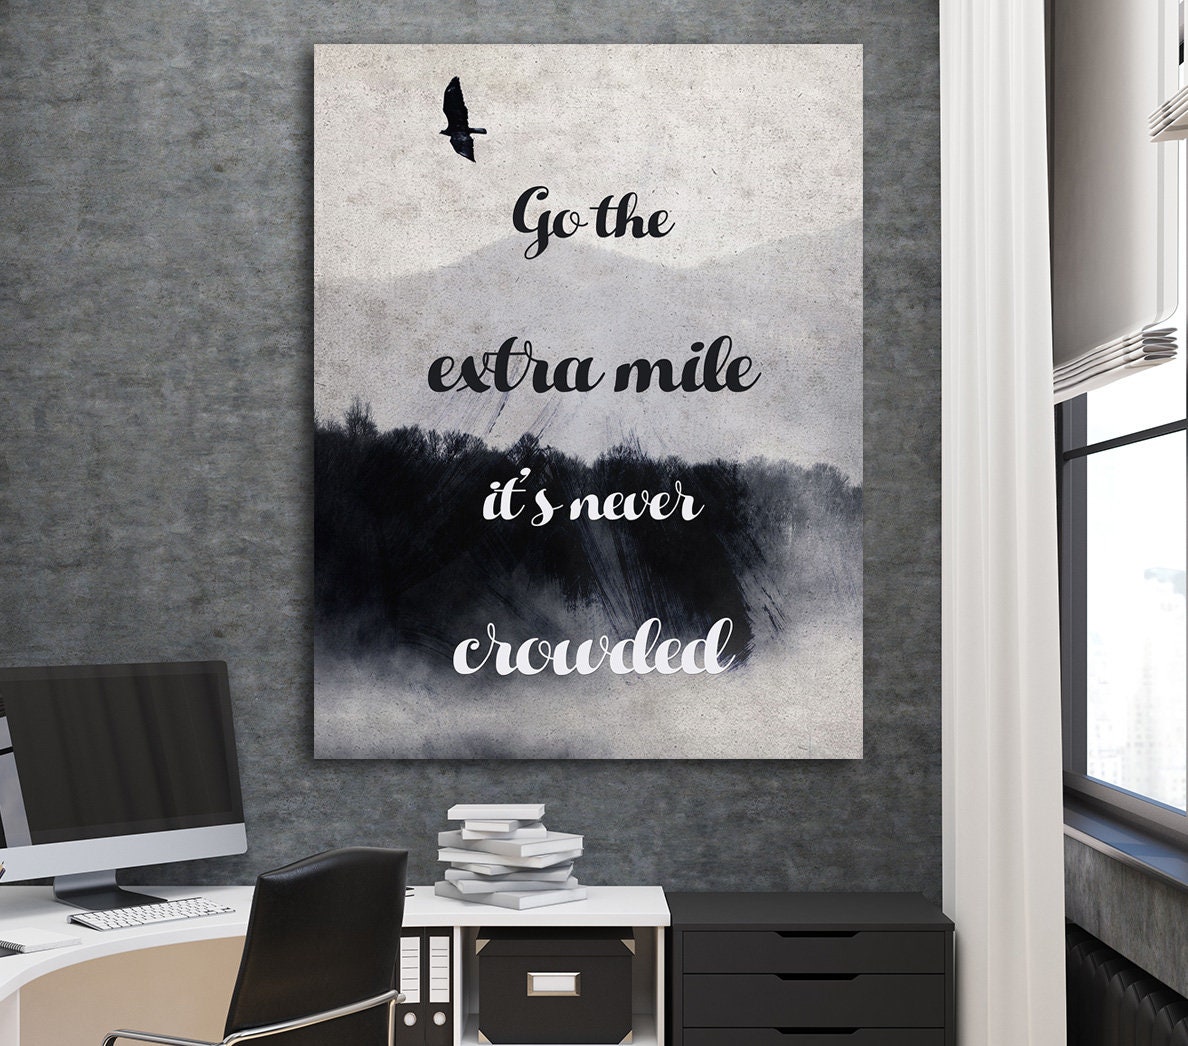 Go the extra mile inspirational quote stickers - TenStickers